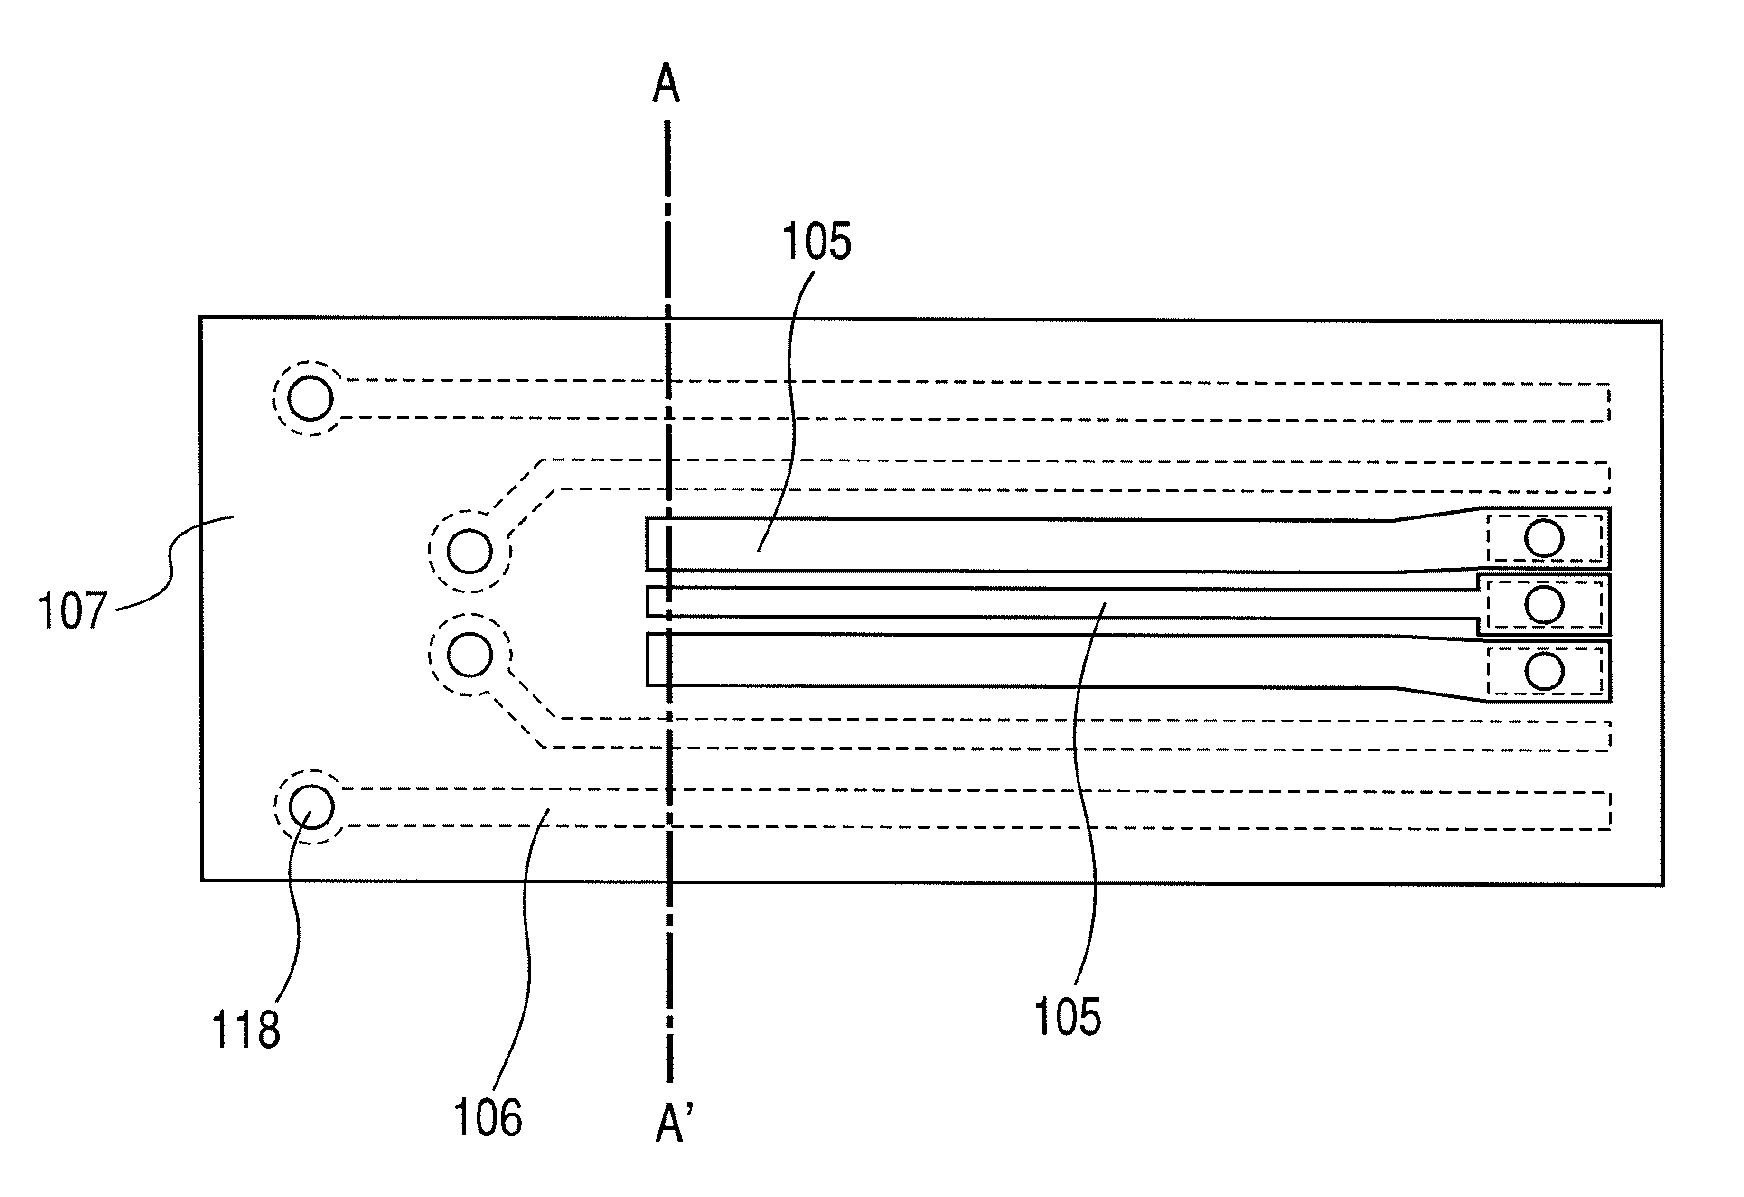 Optical semiconductor device with flexible substrate